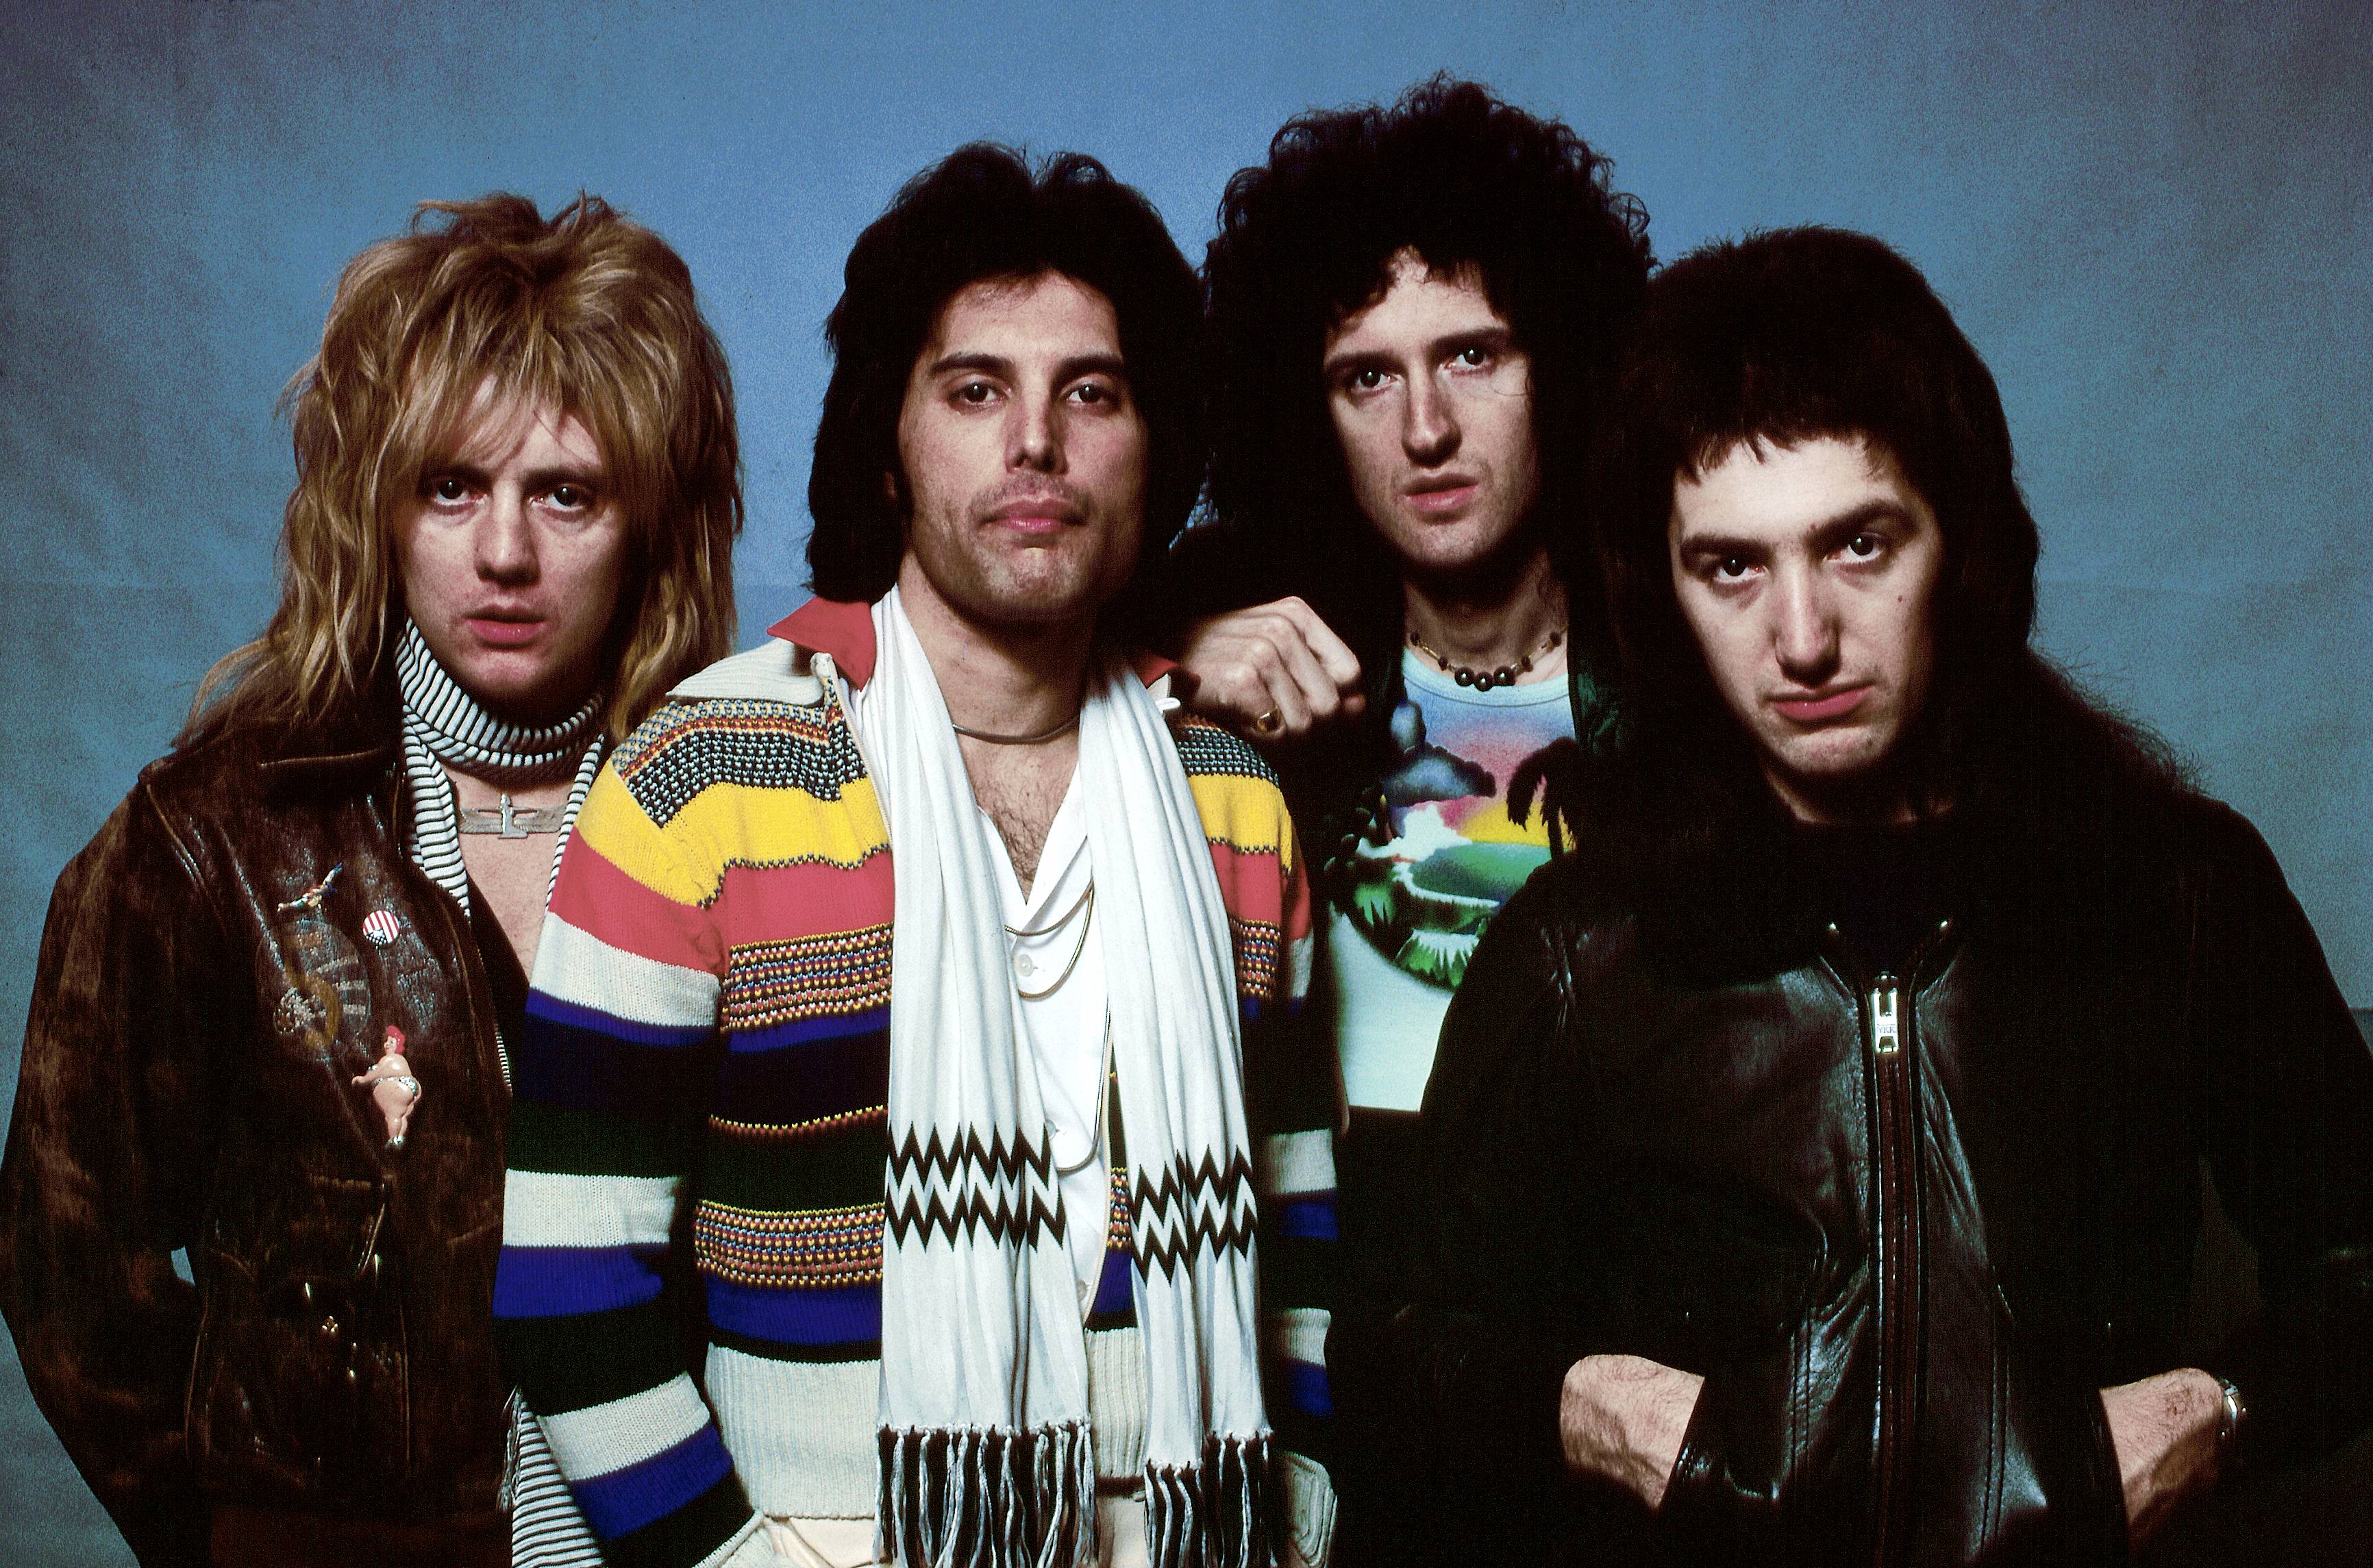 Bramwell discovered bands such as Queen